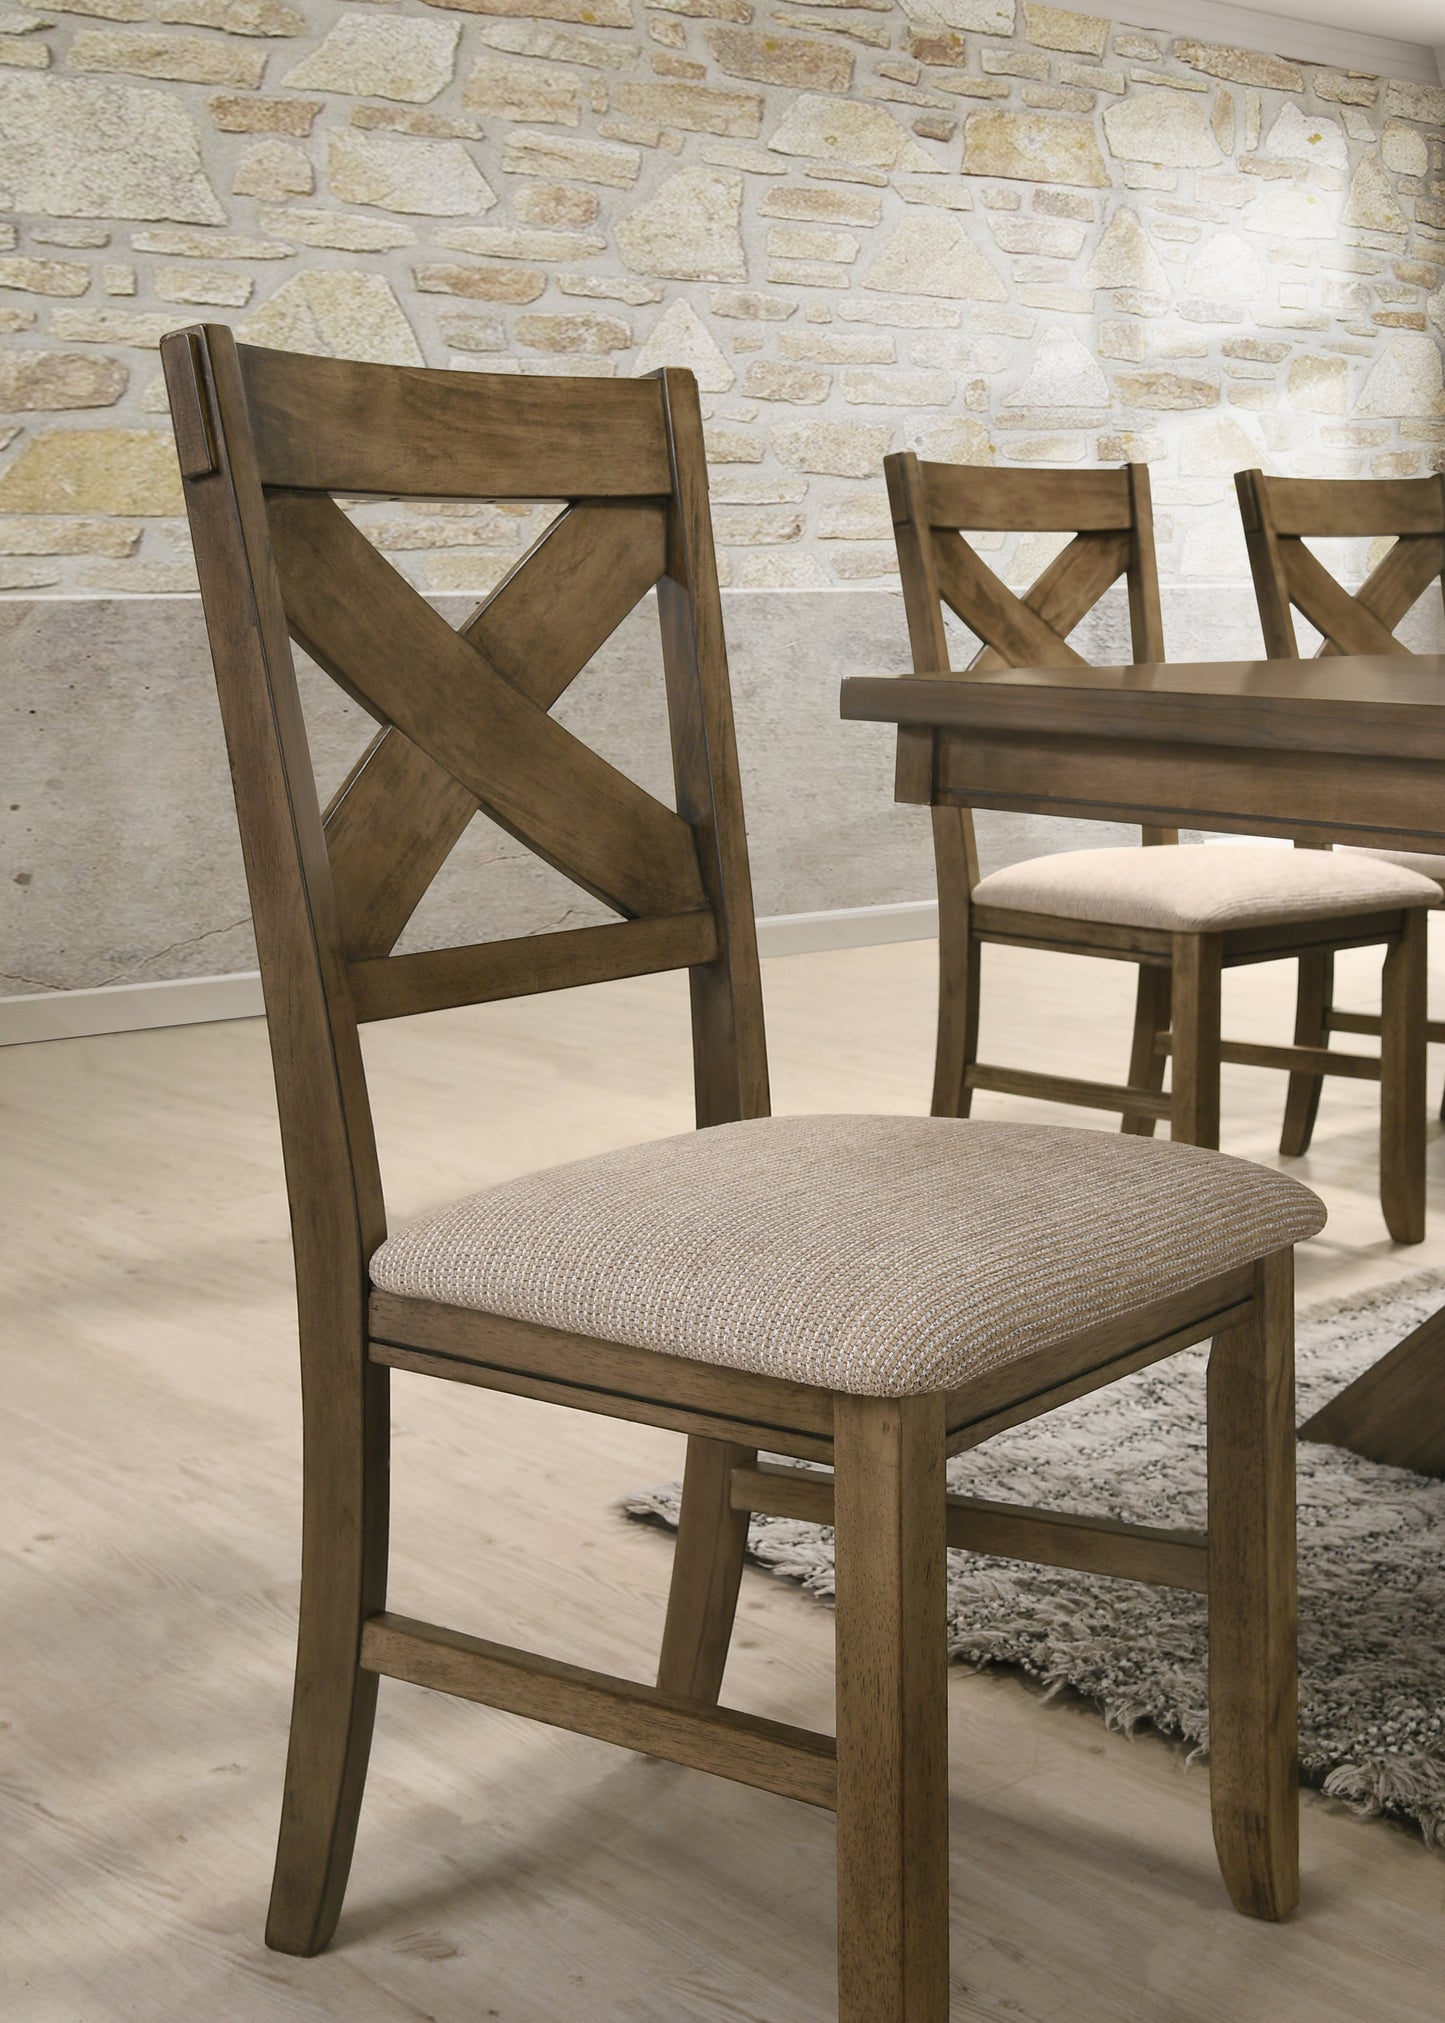 Raven Wood Dining Set: Butterfly Leaf Table, Six Chairs